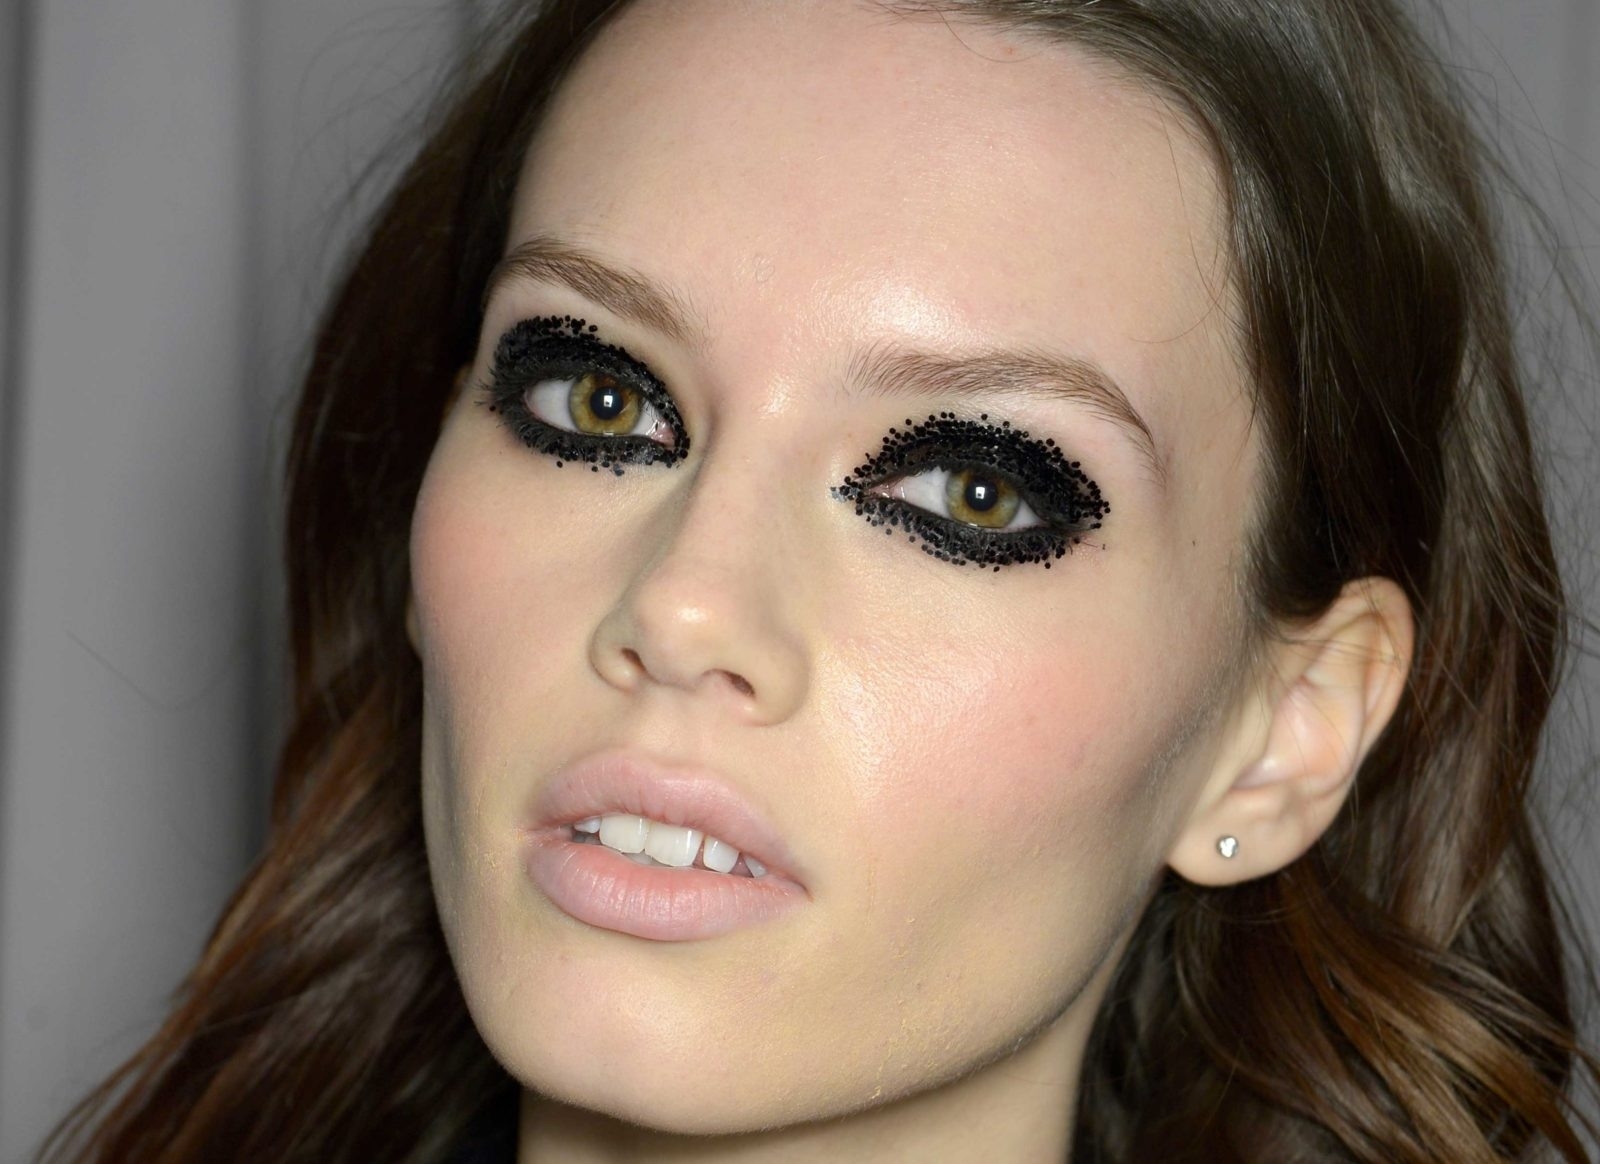 Smoky Eyes: Discover The Best, Easiest Step-By-Step Guide To for Smoky Eyes With Photos